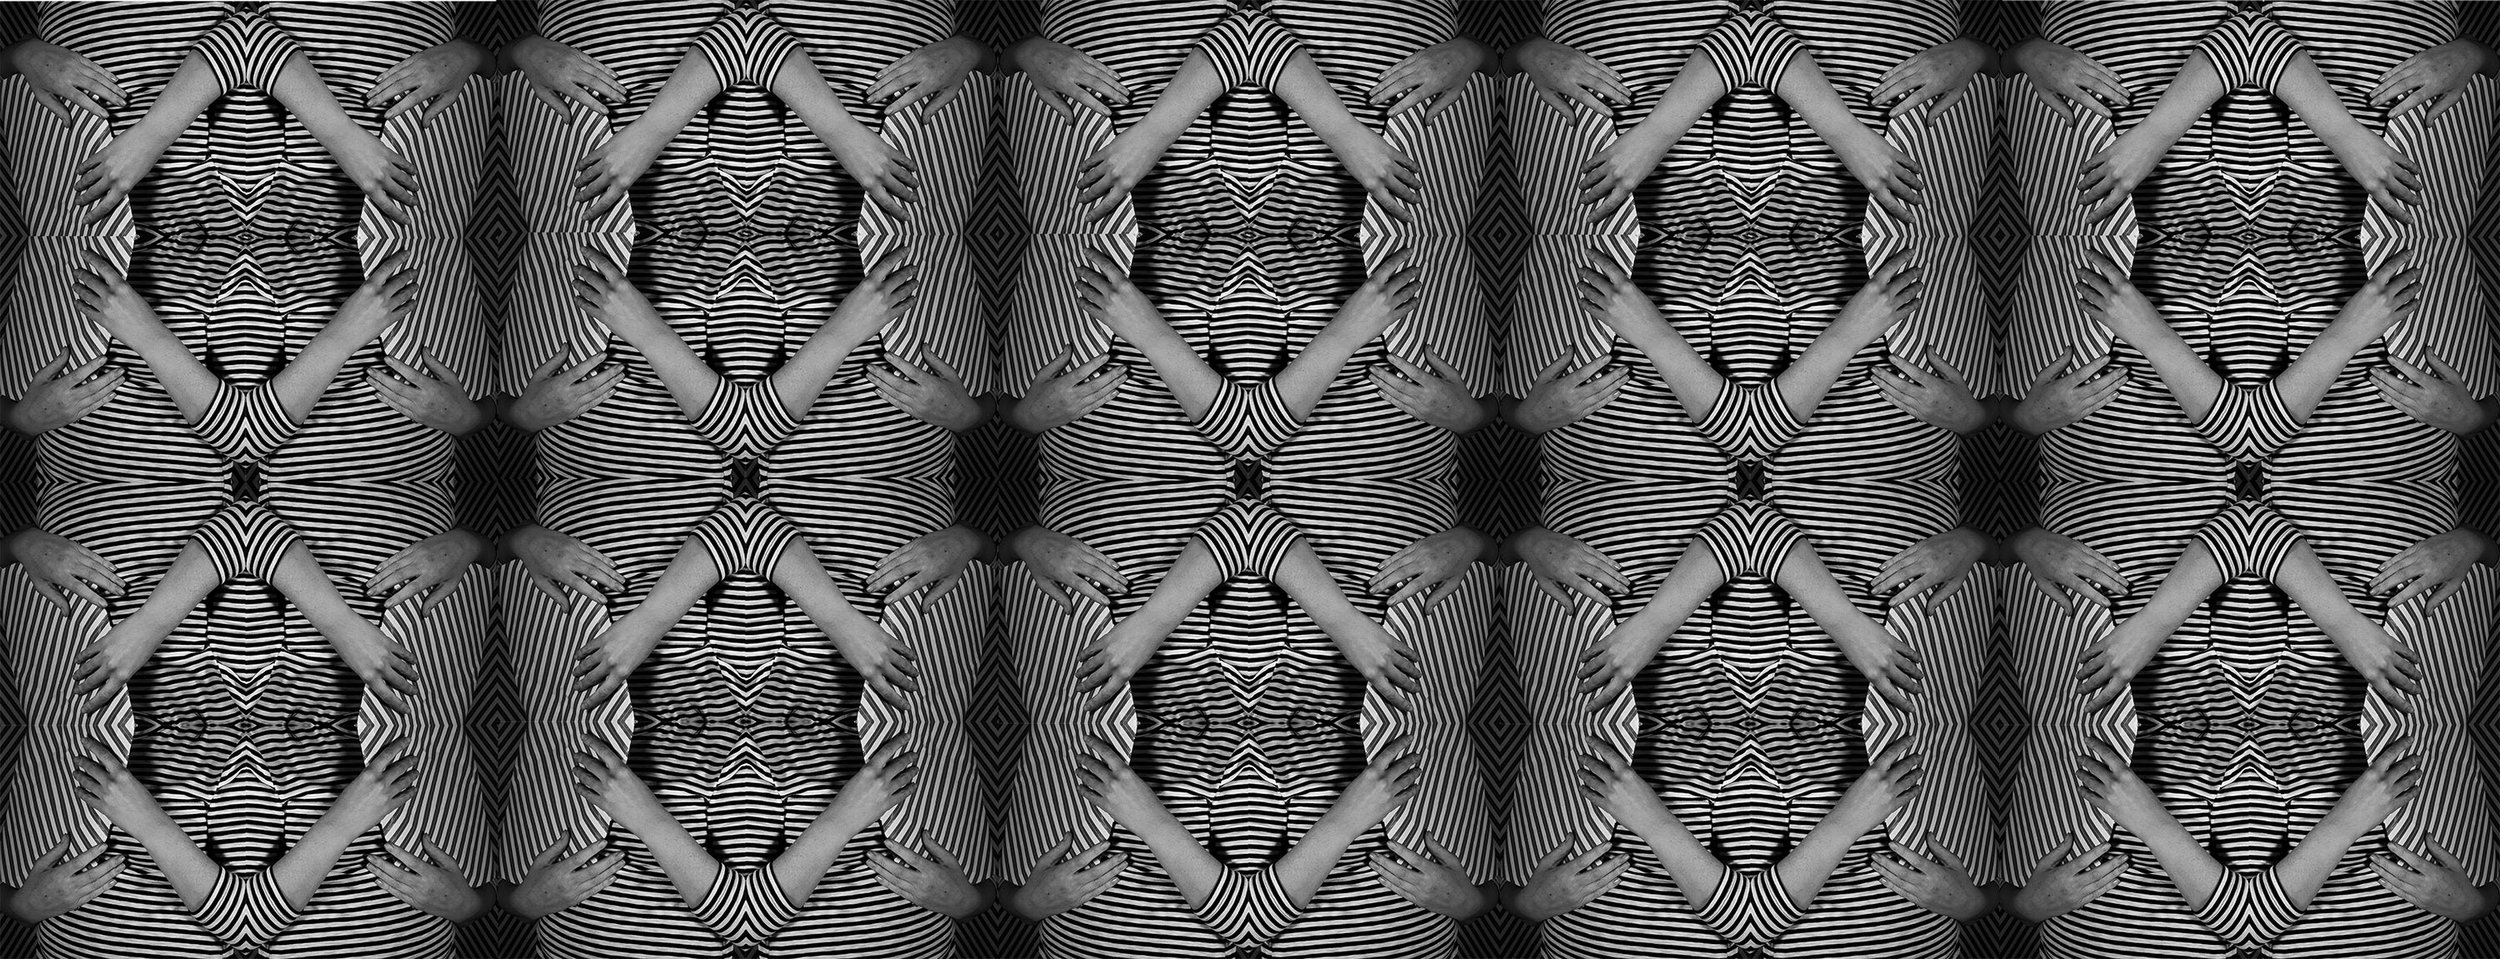 Illusion No. 1 from Mind Loop, 48 by 28 inches, Archival Pigment Print, 2018